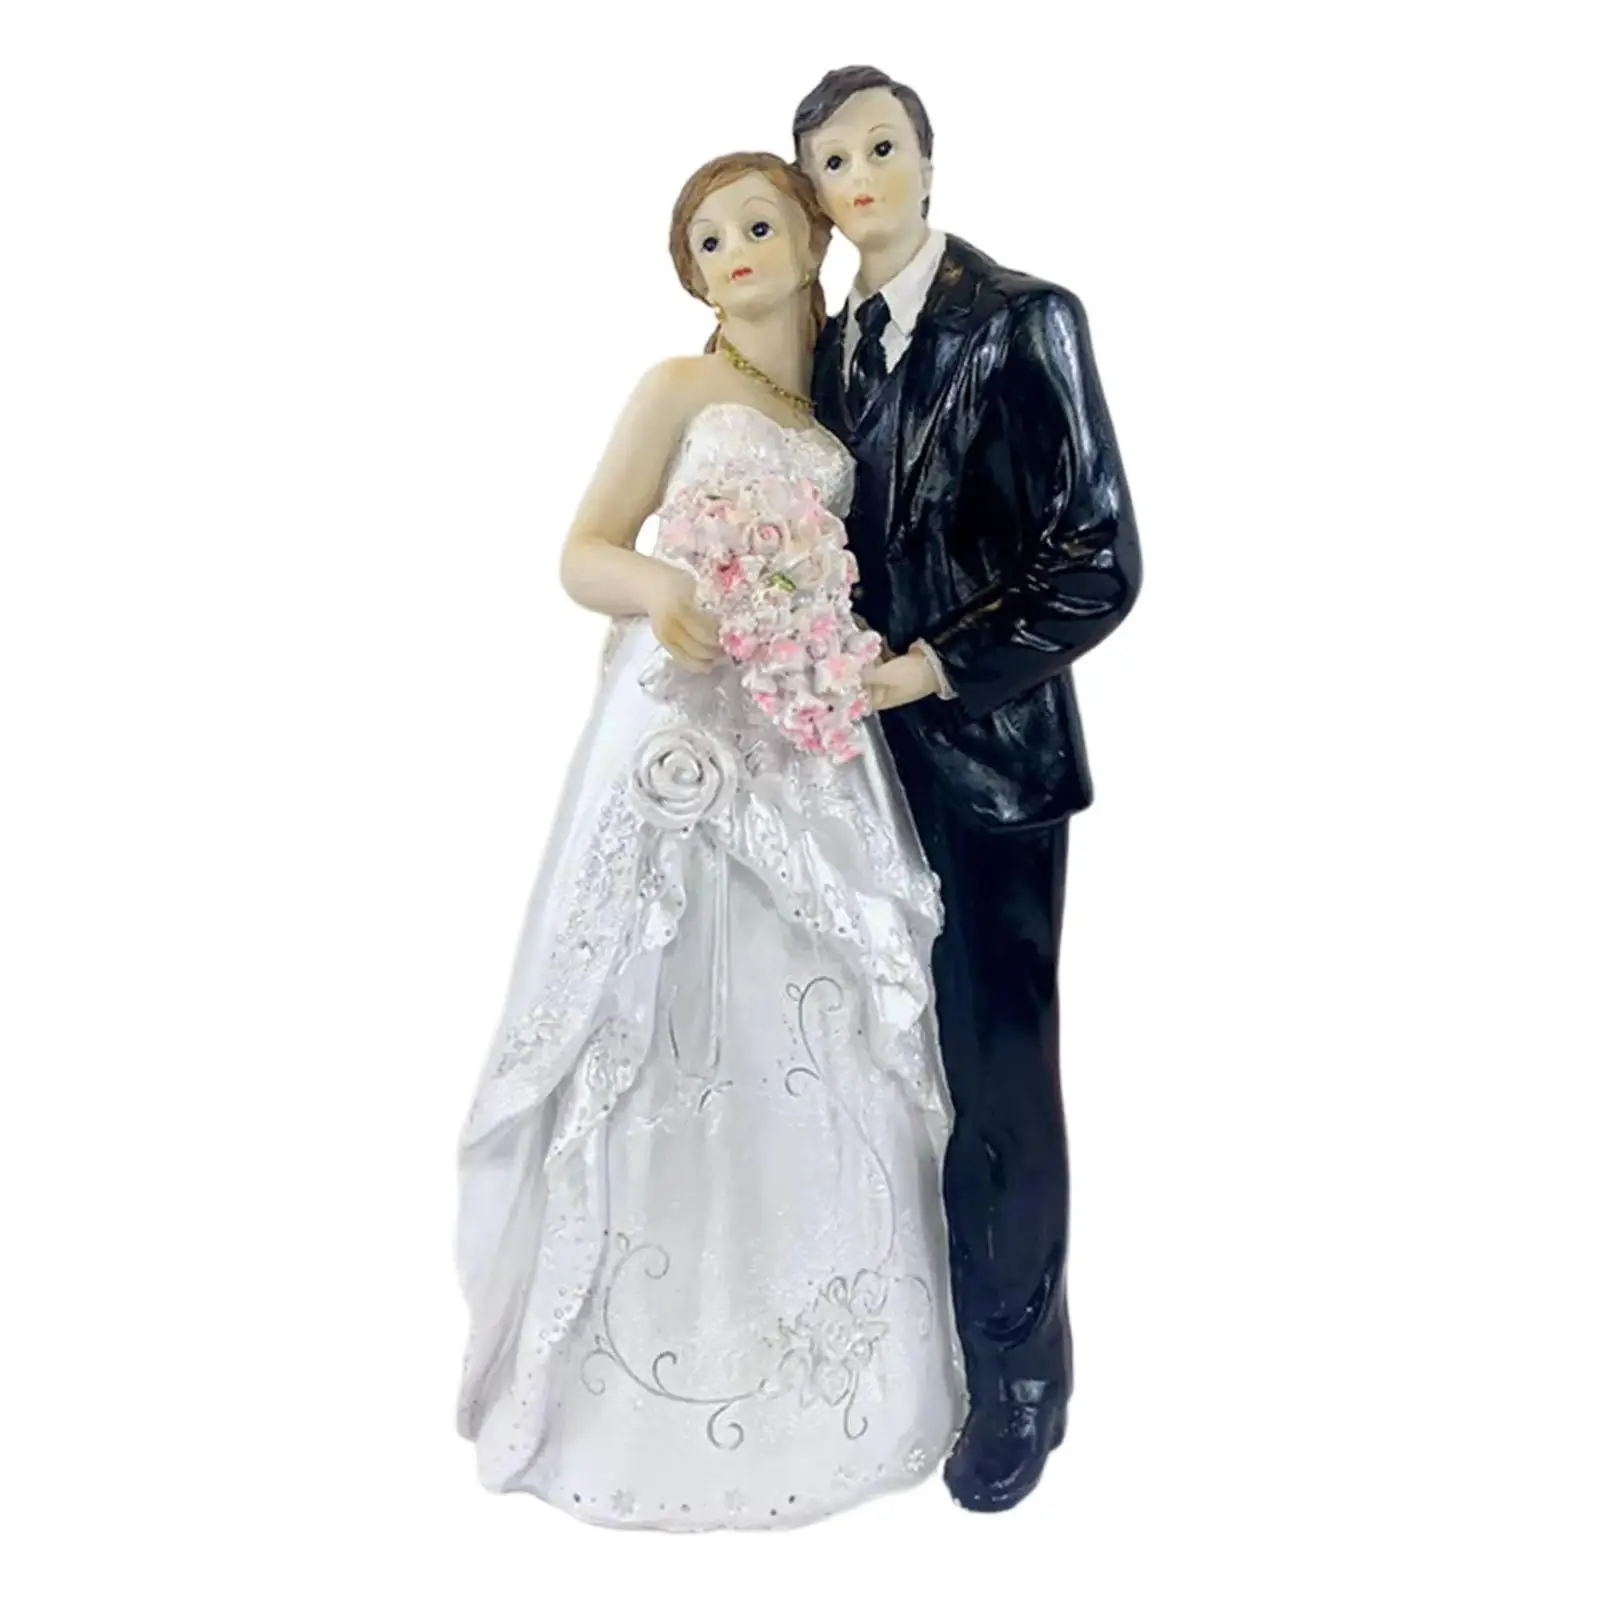 Home Decor Resin Statue People Model Figurines for Interior Home Decoration Accessories Living Room Decoration Christmas Gifts